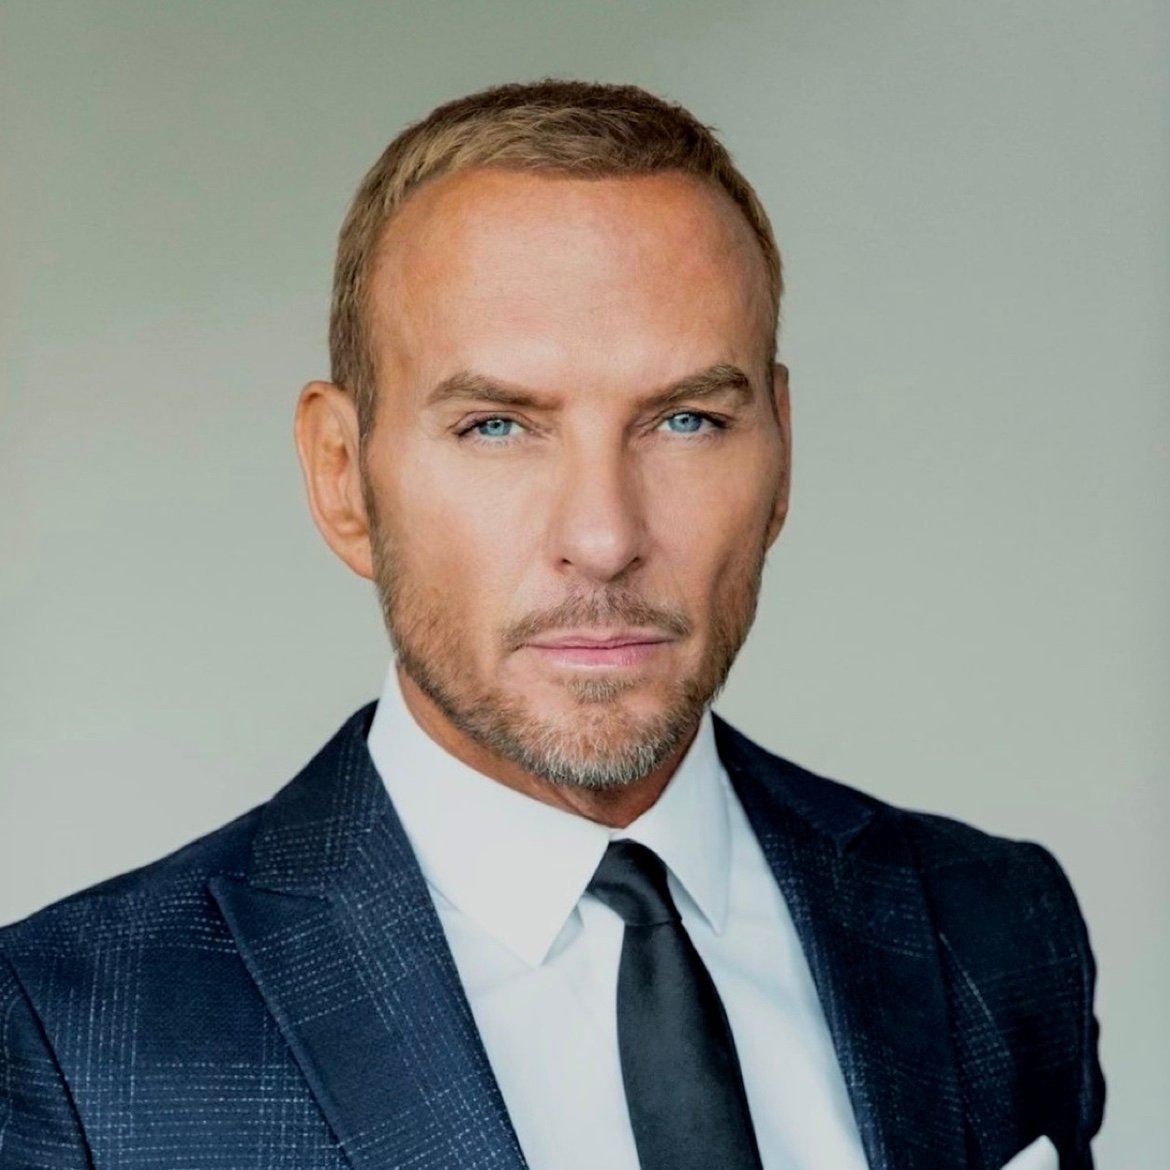 Follow me for the latest news about music artist Matt Goss. I'm the owner of the MG Music fansite, A friend of Matt for 30 yrs. I'm always here to help others!